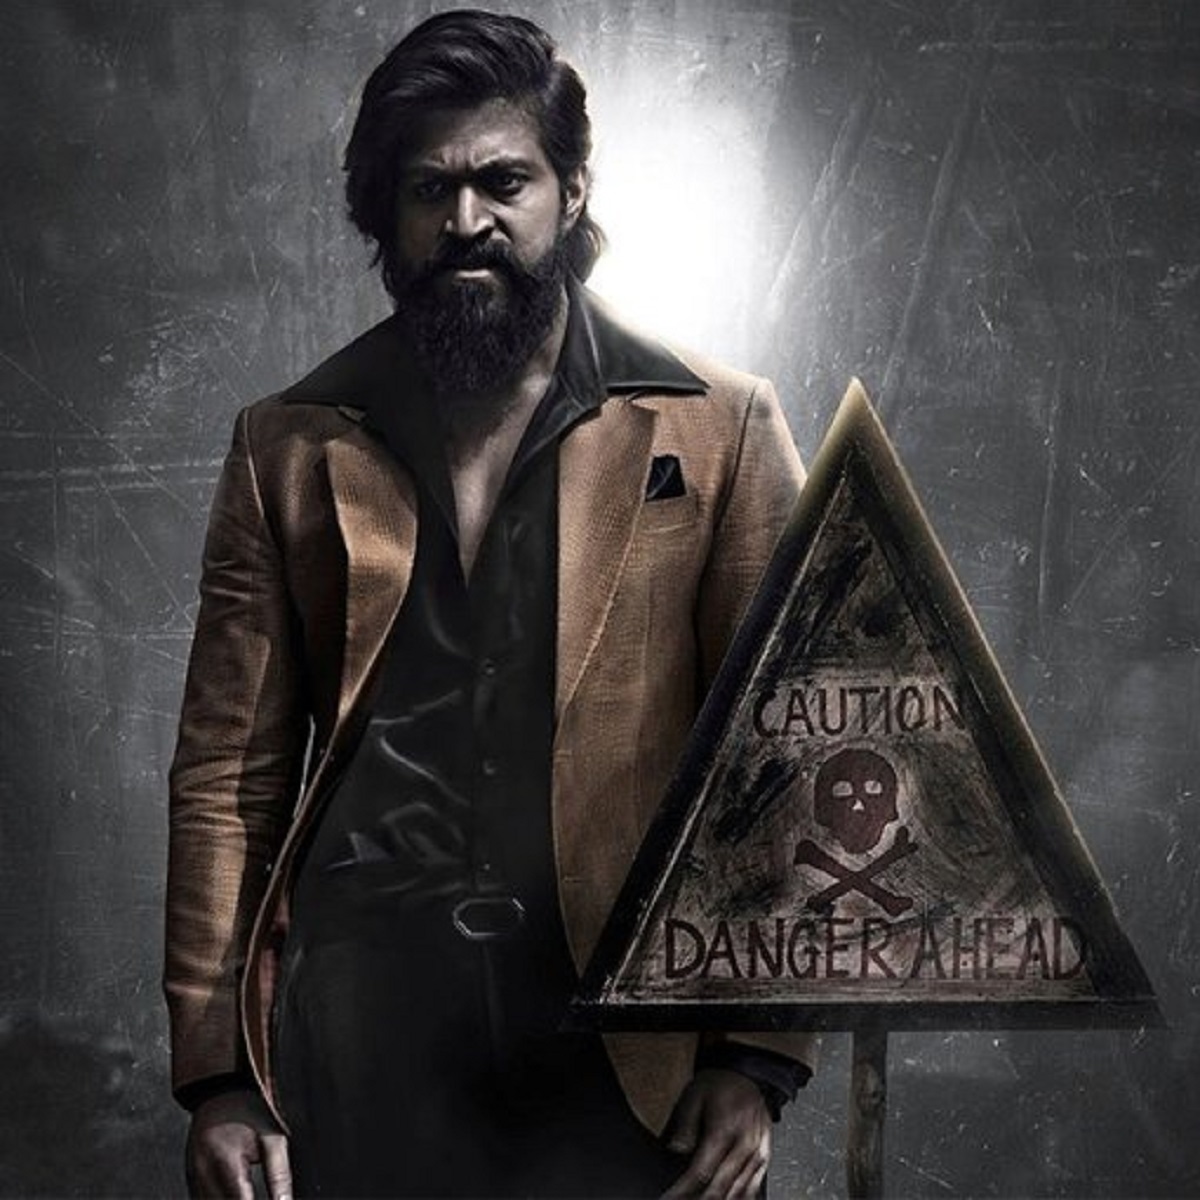 KGF 2 (Hindi) Box Office: Rocky Bhai aka Yash sells 22.5 Lakh tickets; Collects Rs 50 crore in advance booking